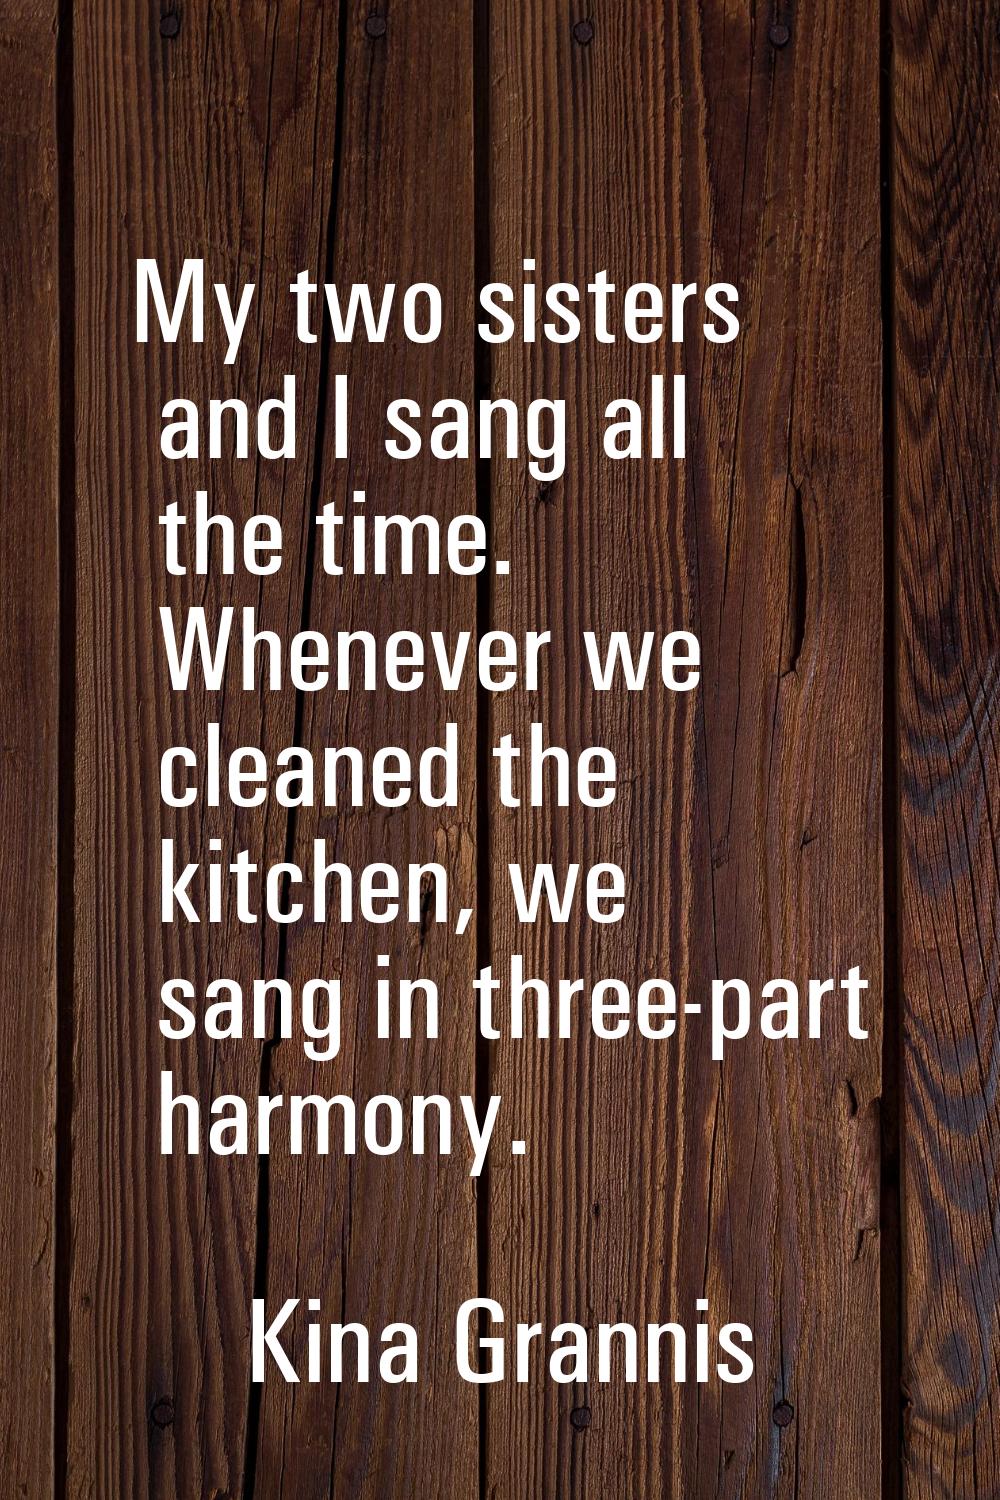 My two sisters and I sang all the time. Whenever we cleaned the kitchen, we sang in three-part harm